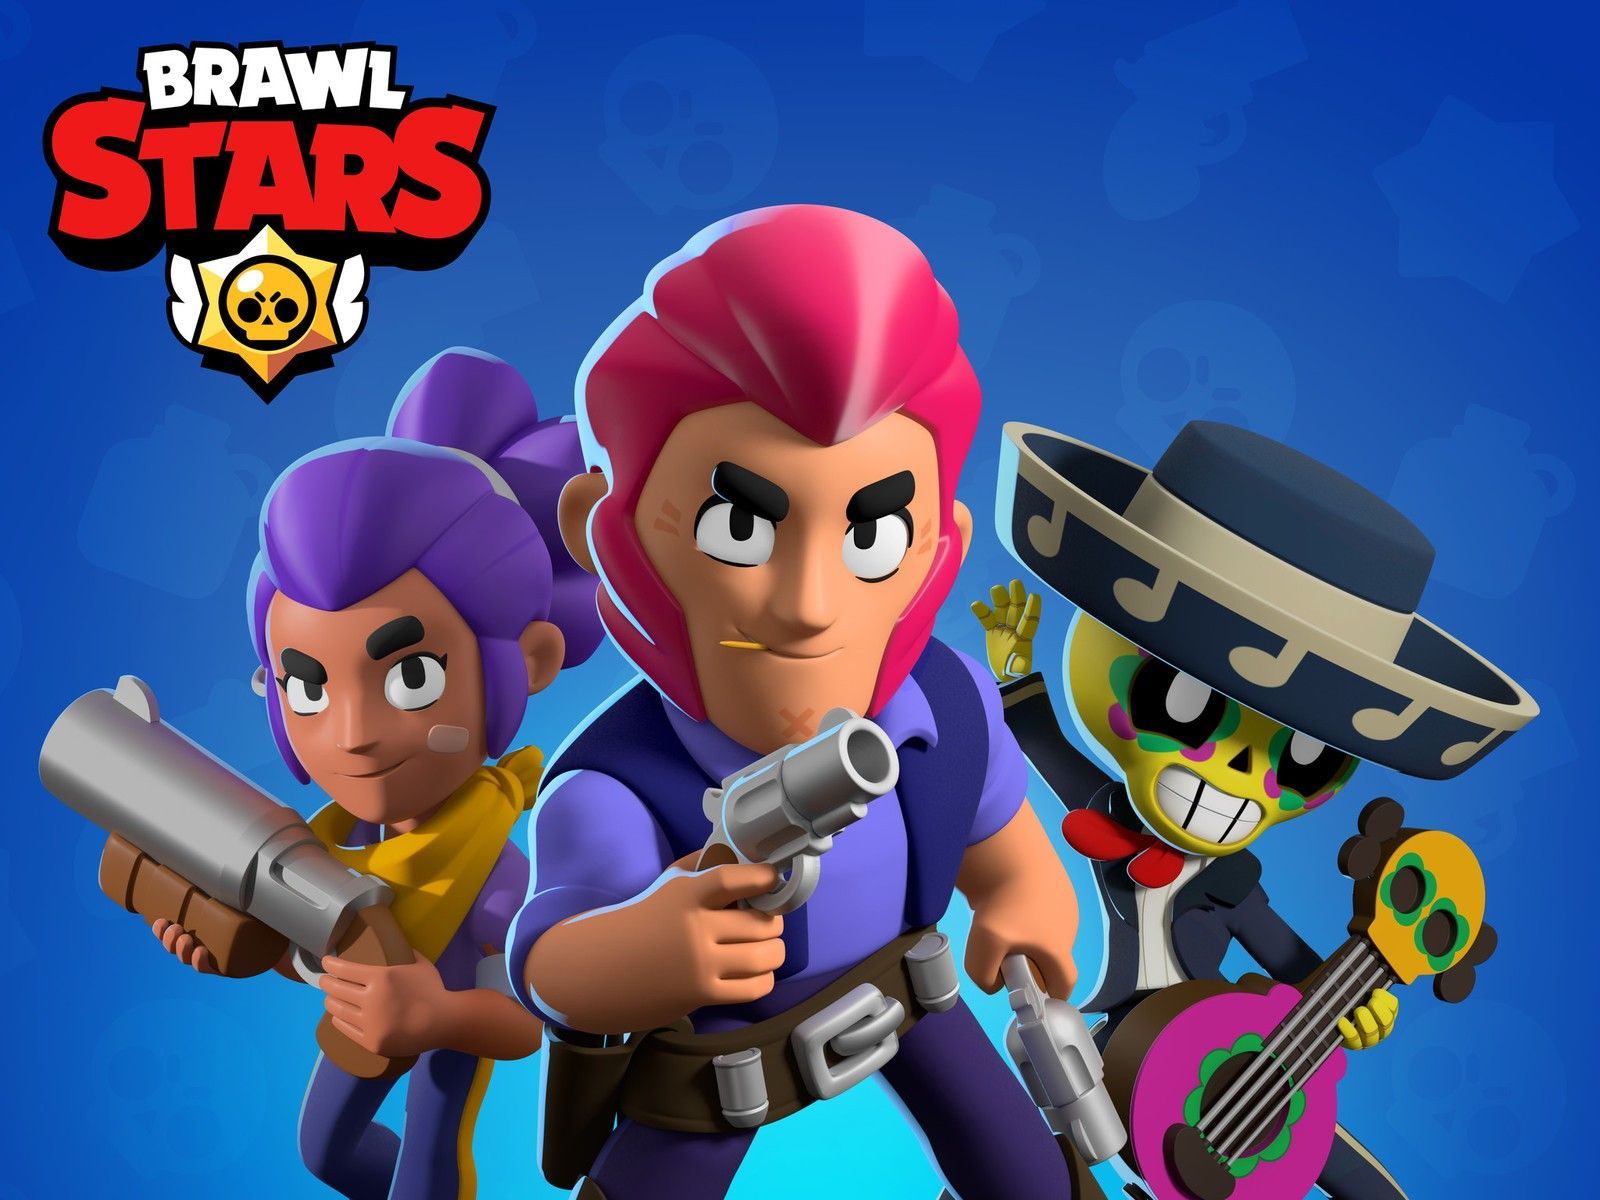 Download Brawl Stars Crow Background. Not good enough? Go to Brawl Stars Crow Background you can looking for more Marvelous w. Star character, Clash royale, Brawl